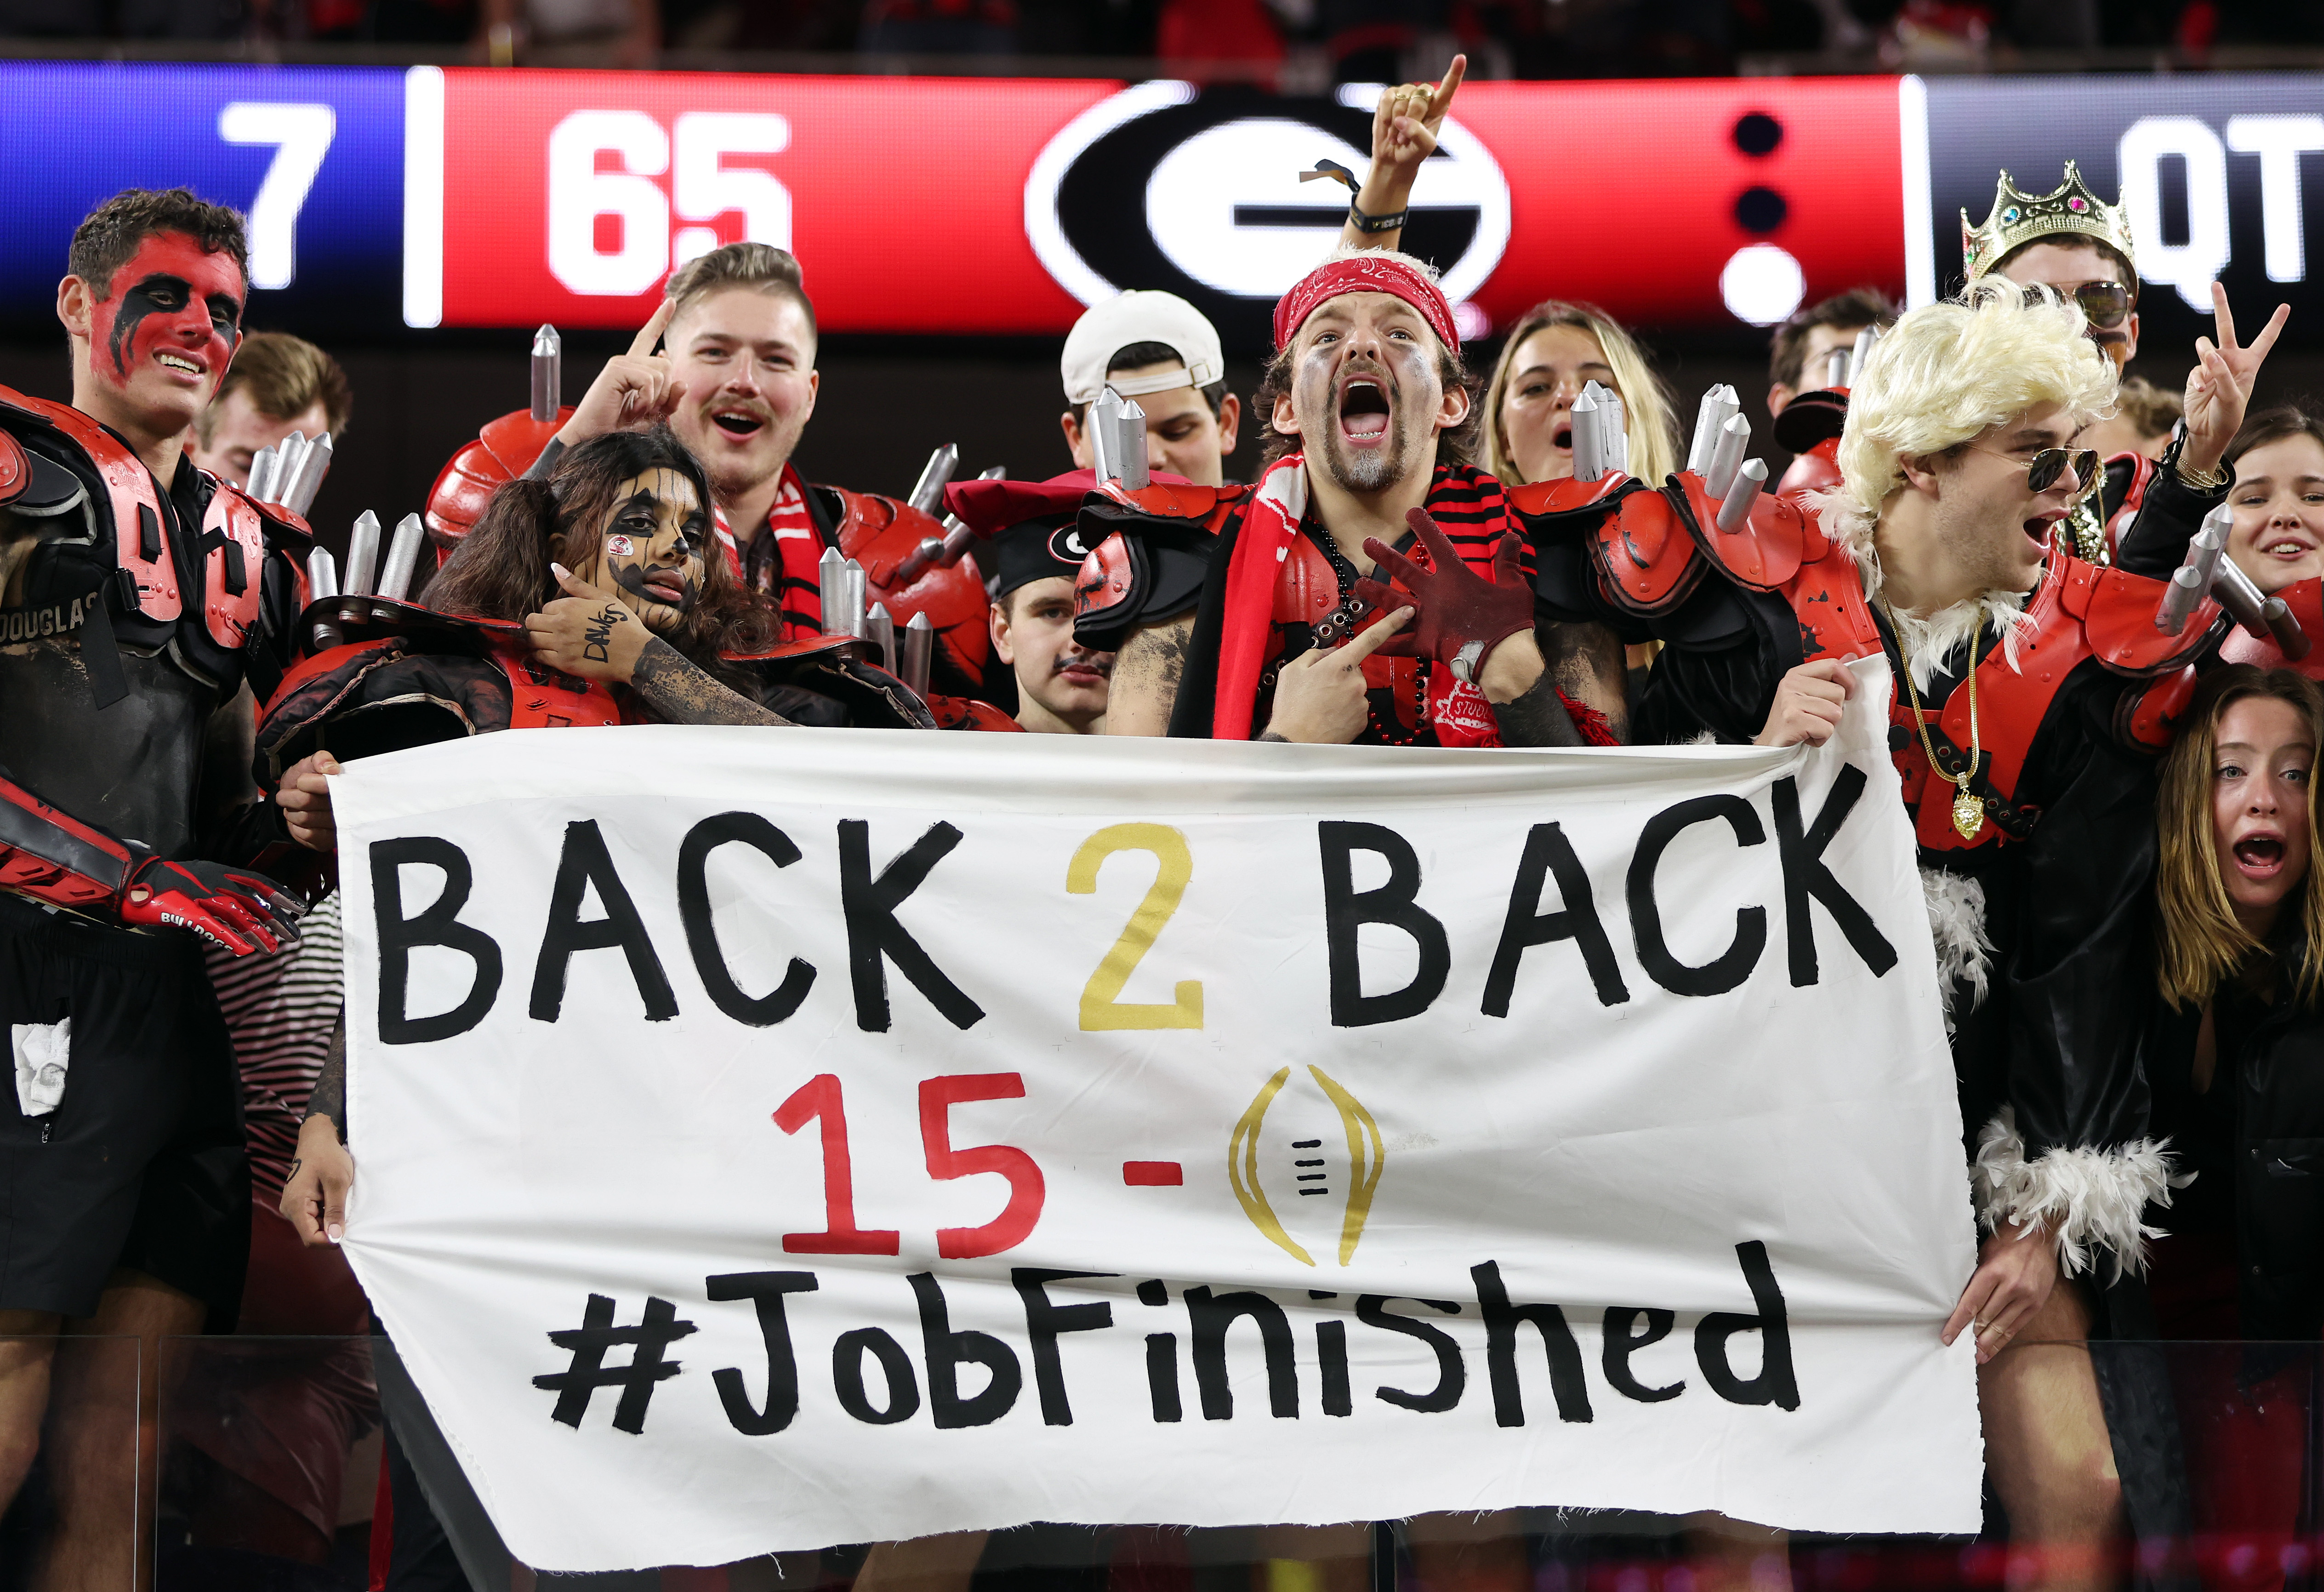 2021-22 College Football Playoff National Championship: Why Georgia is  still the favorite over Alabama, College Football